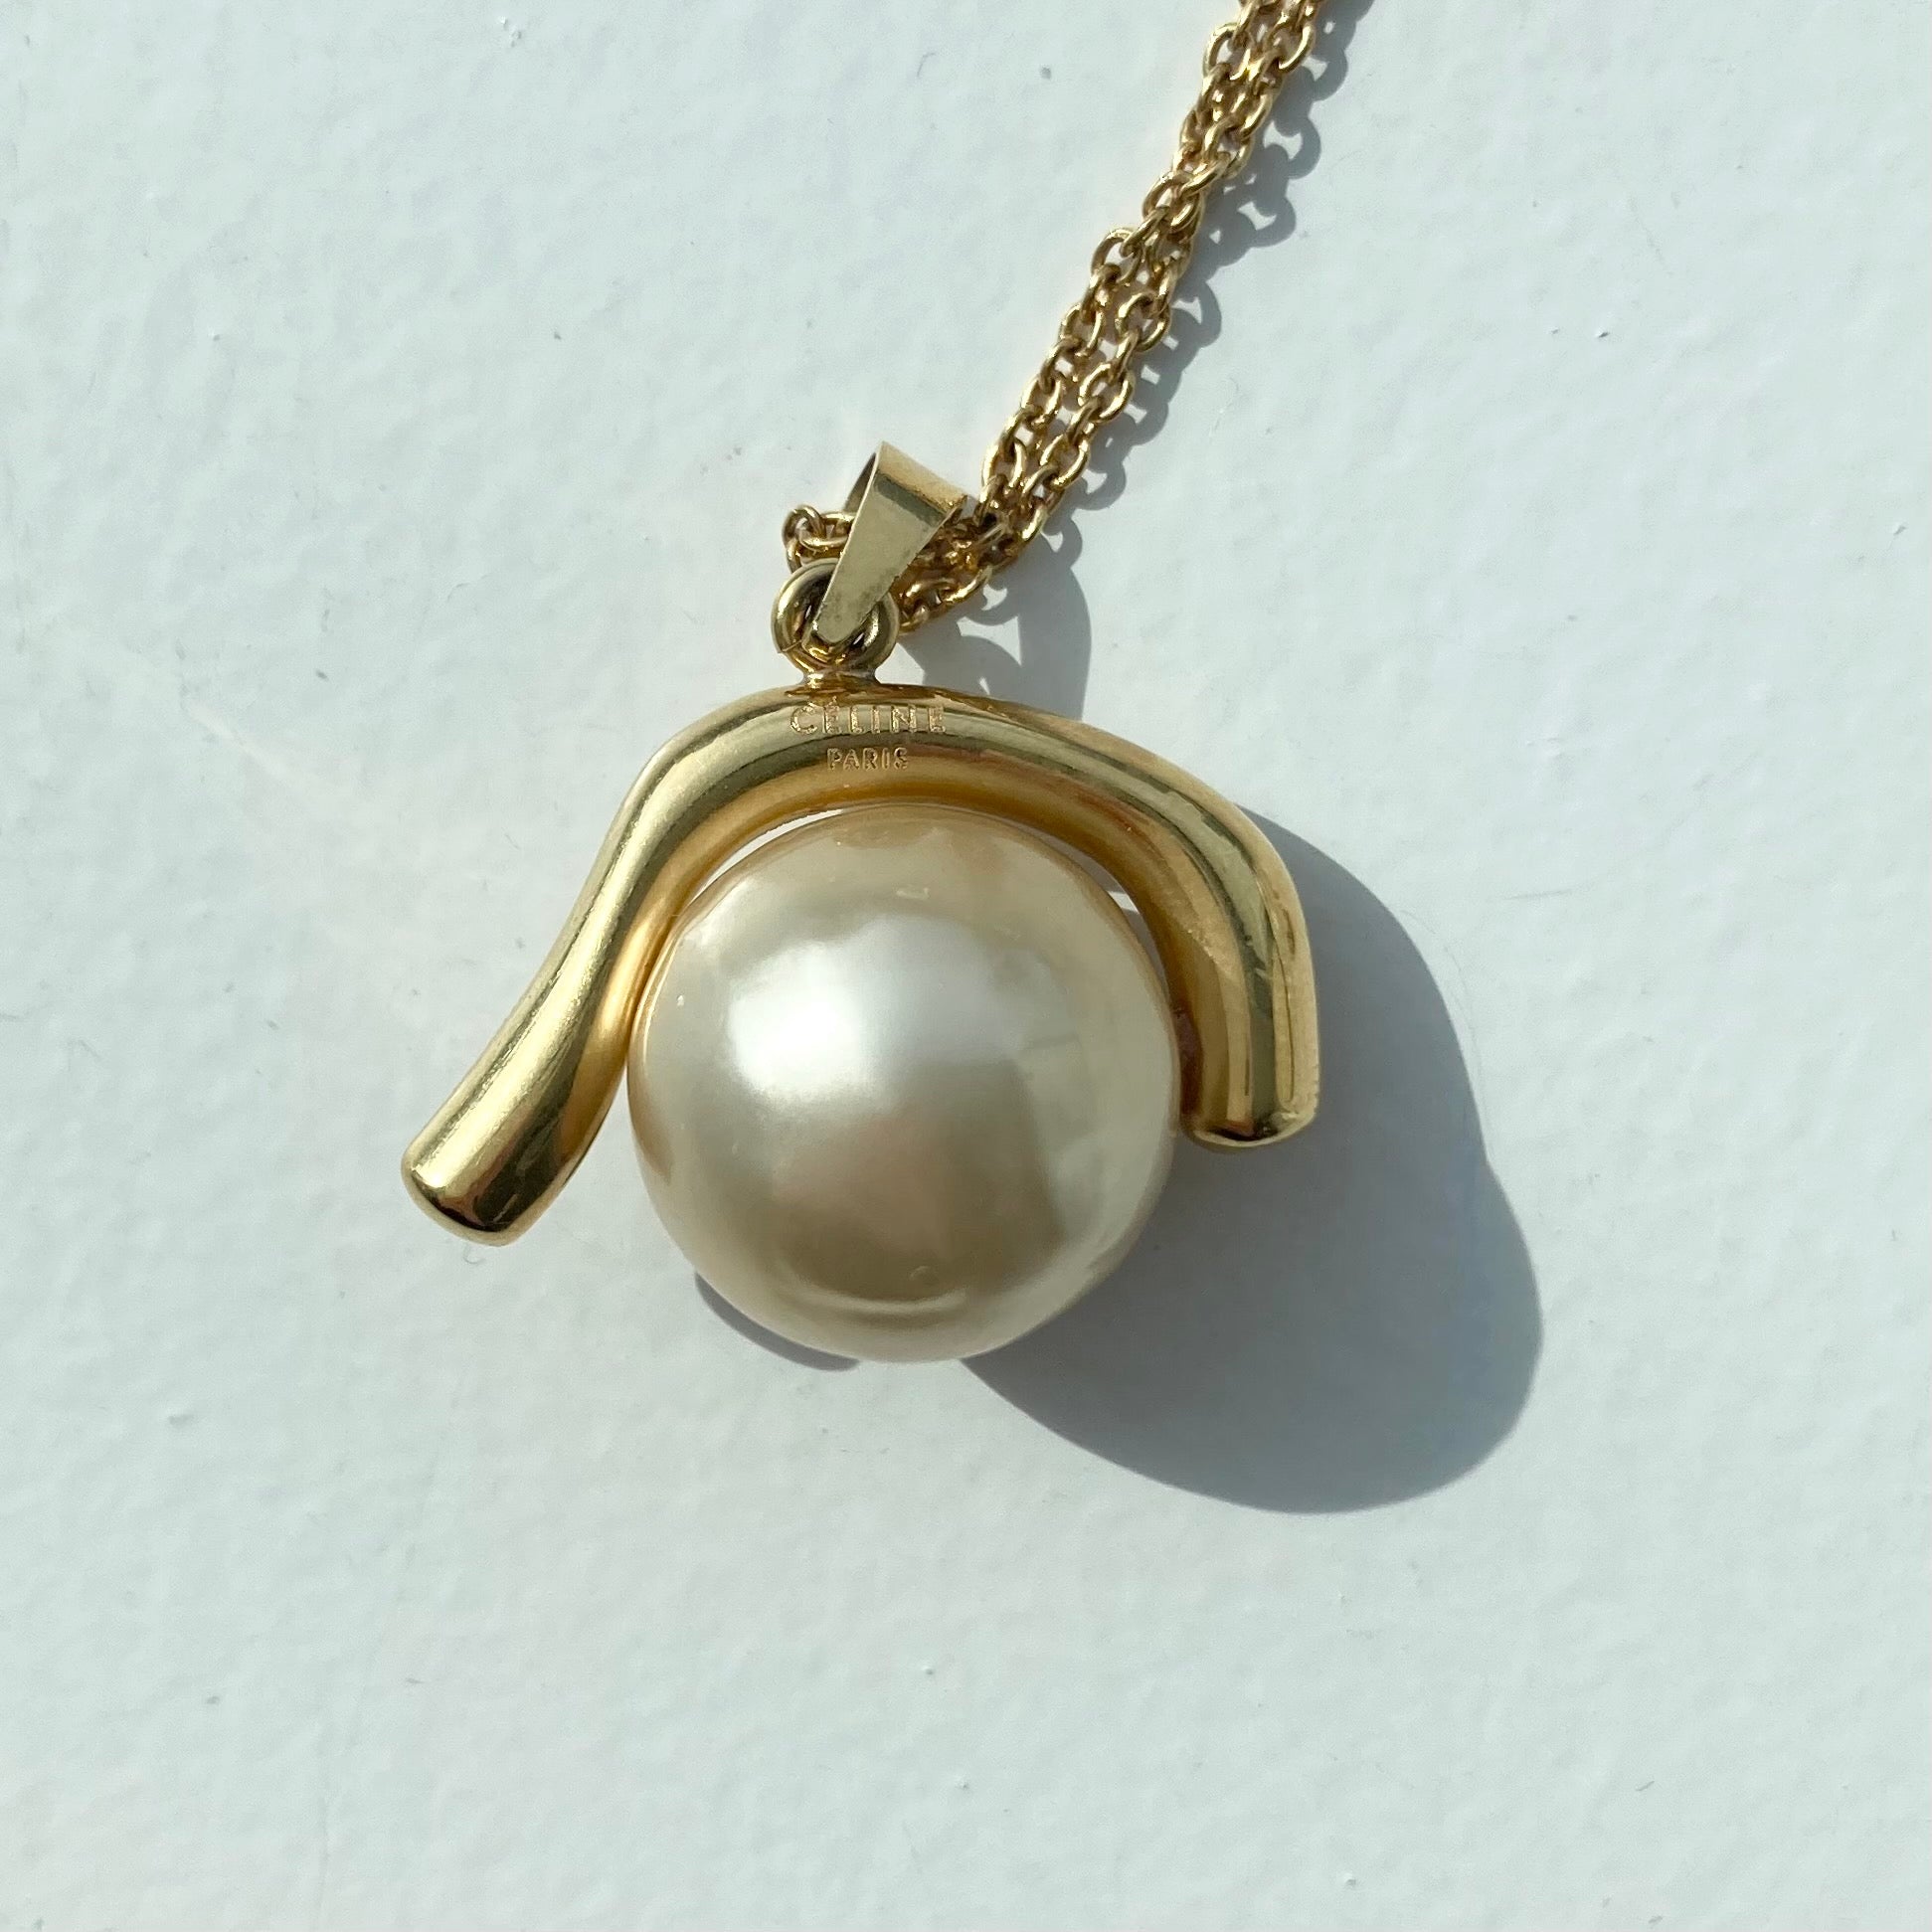 Celine by Phoebe Philo Fake pearl necklace セリーヌ フィービー期